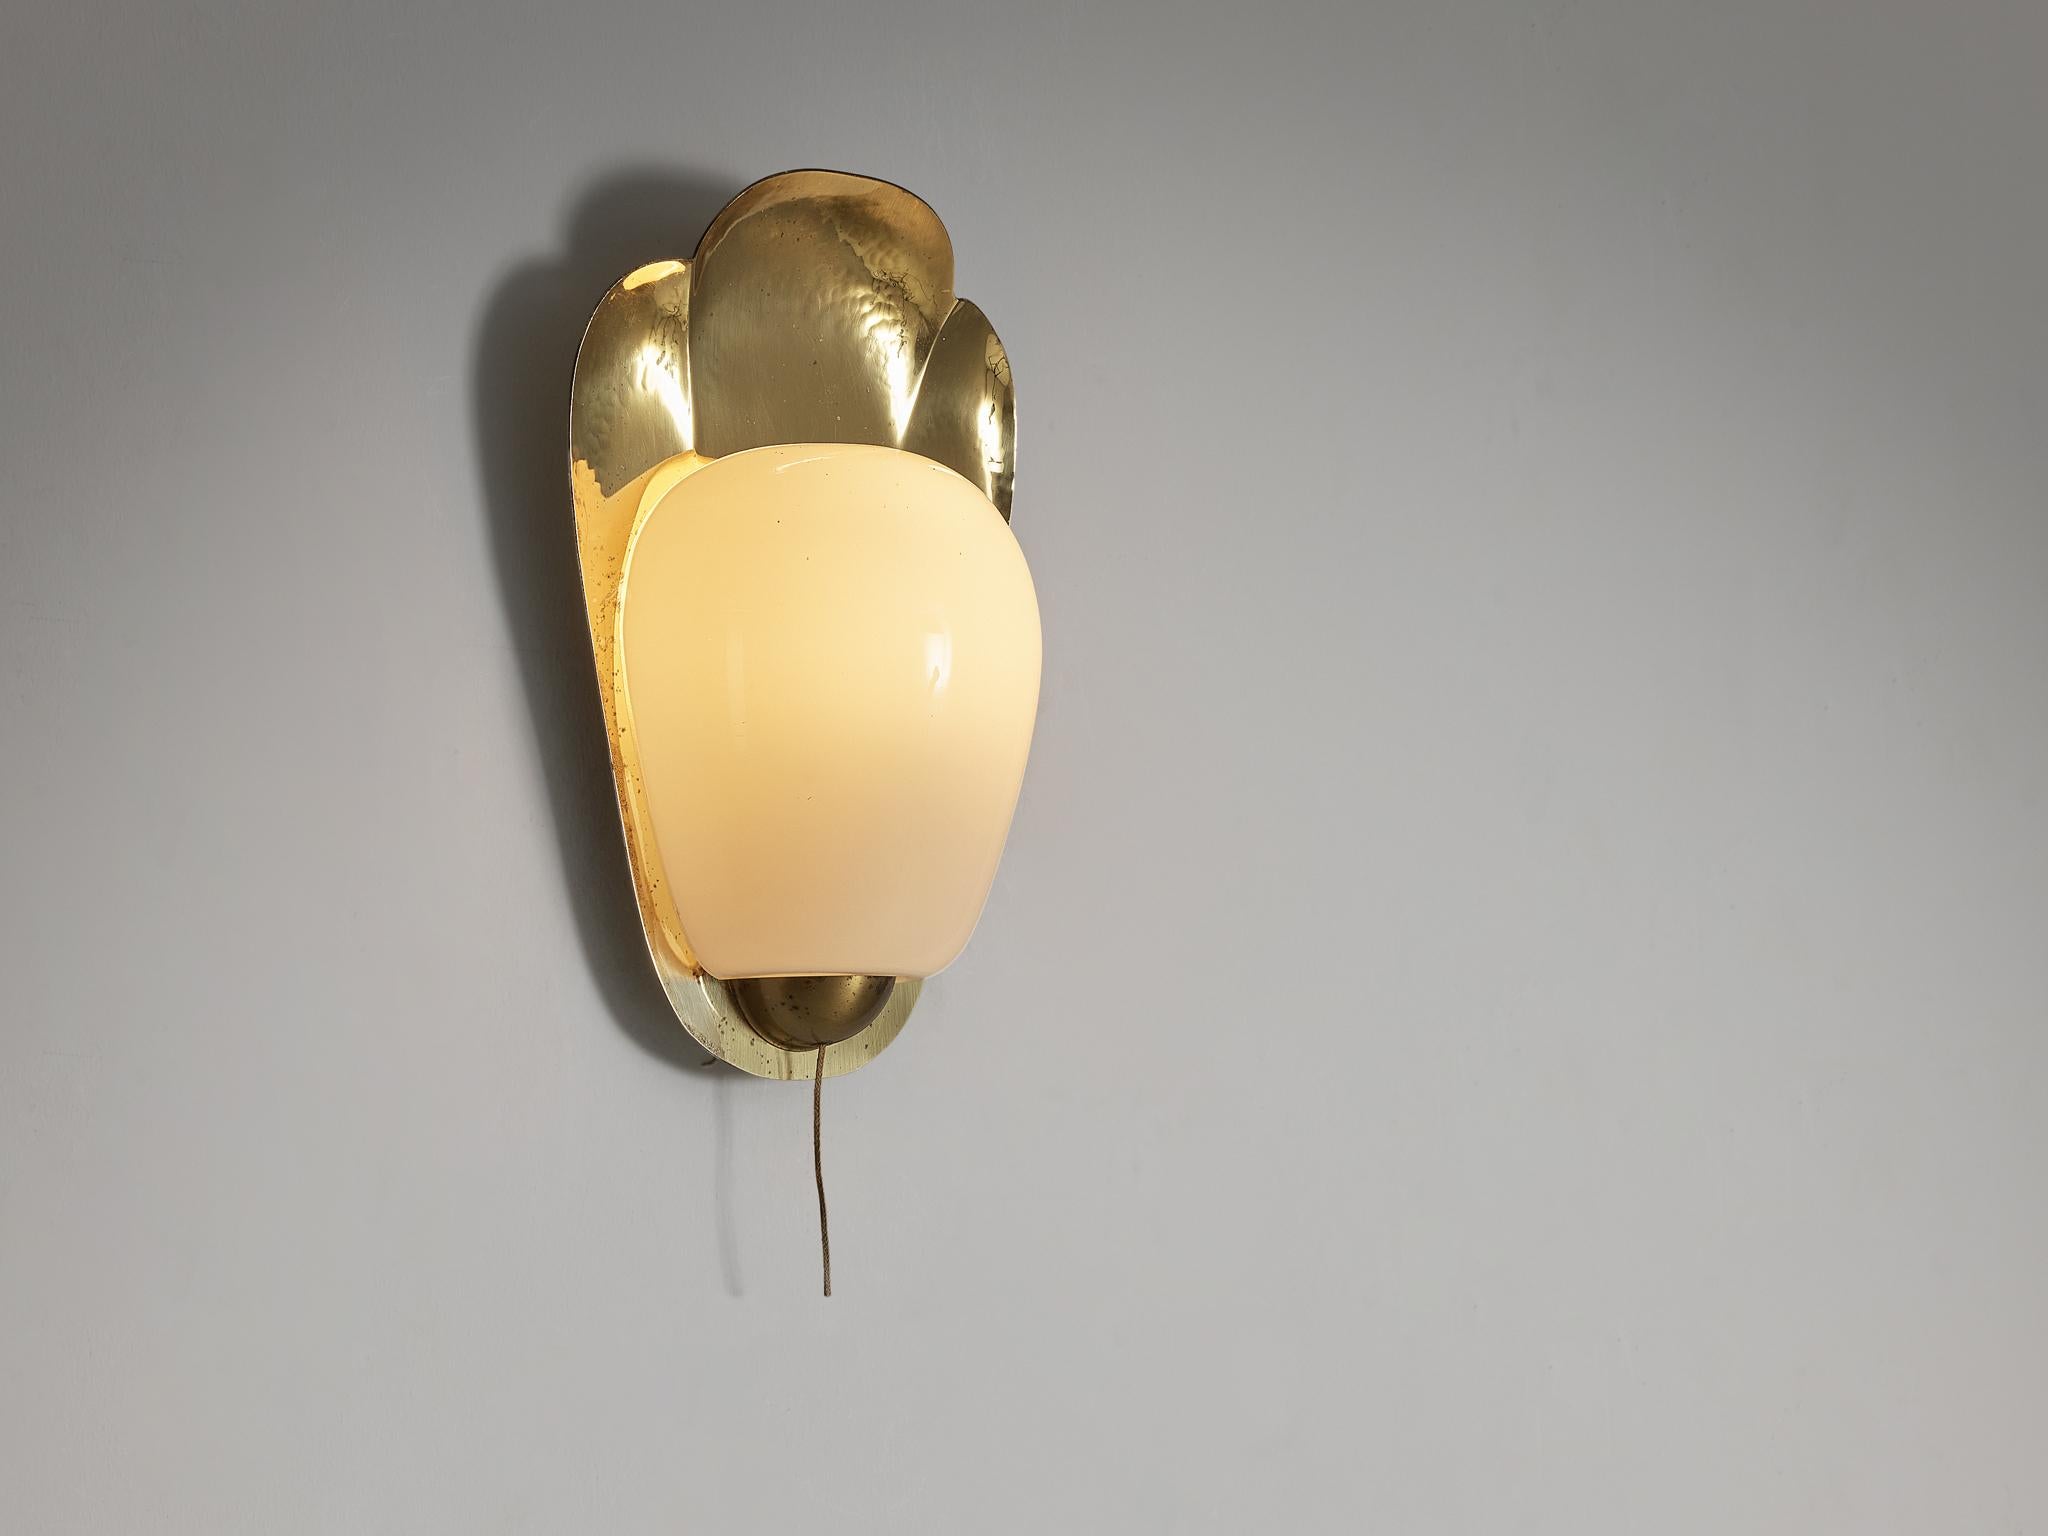 Wall light, brass, glass, Europe, 1960s

Its form gracefully embodies delicate round shapes. The light beautifully reflects on the brass frame, evoking a mesmerizing light effect. While its design may exude simplicity, it is the combination of